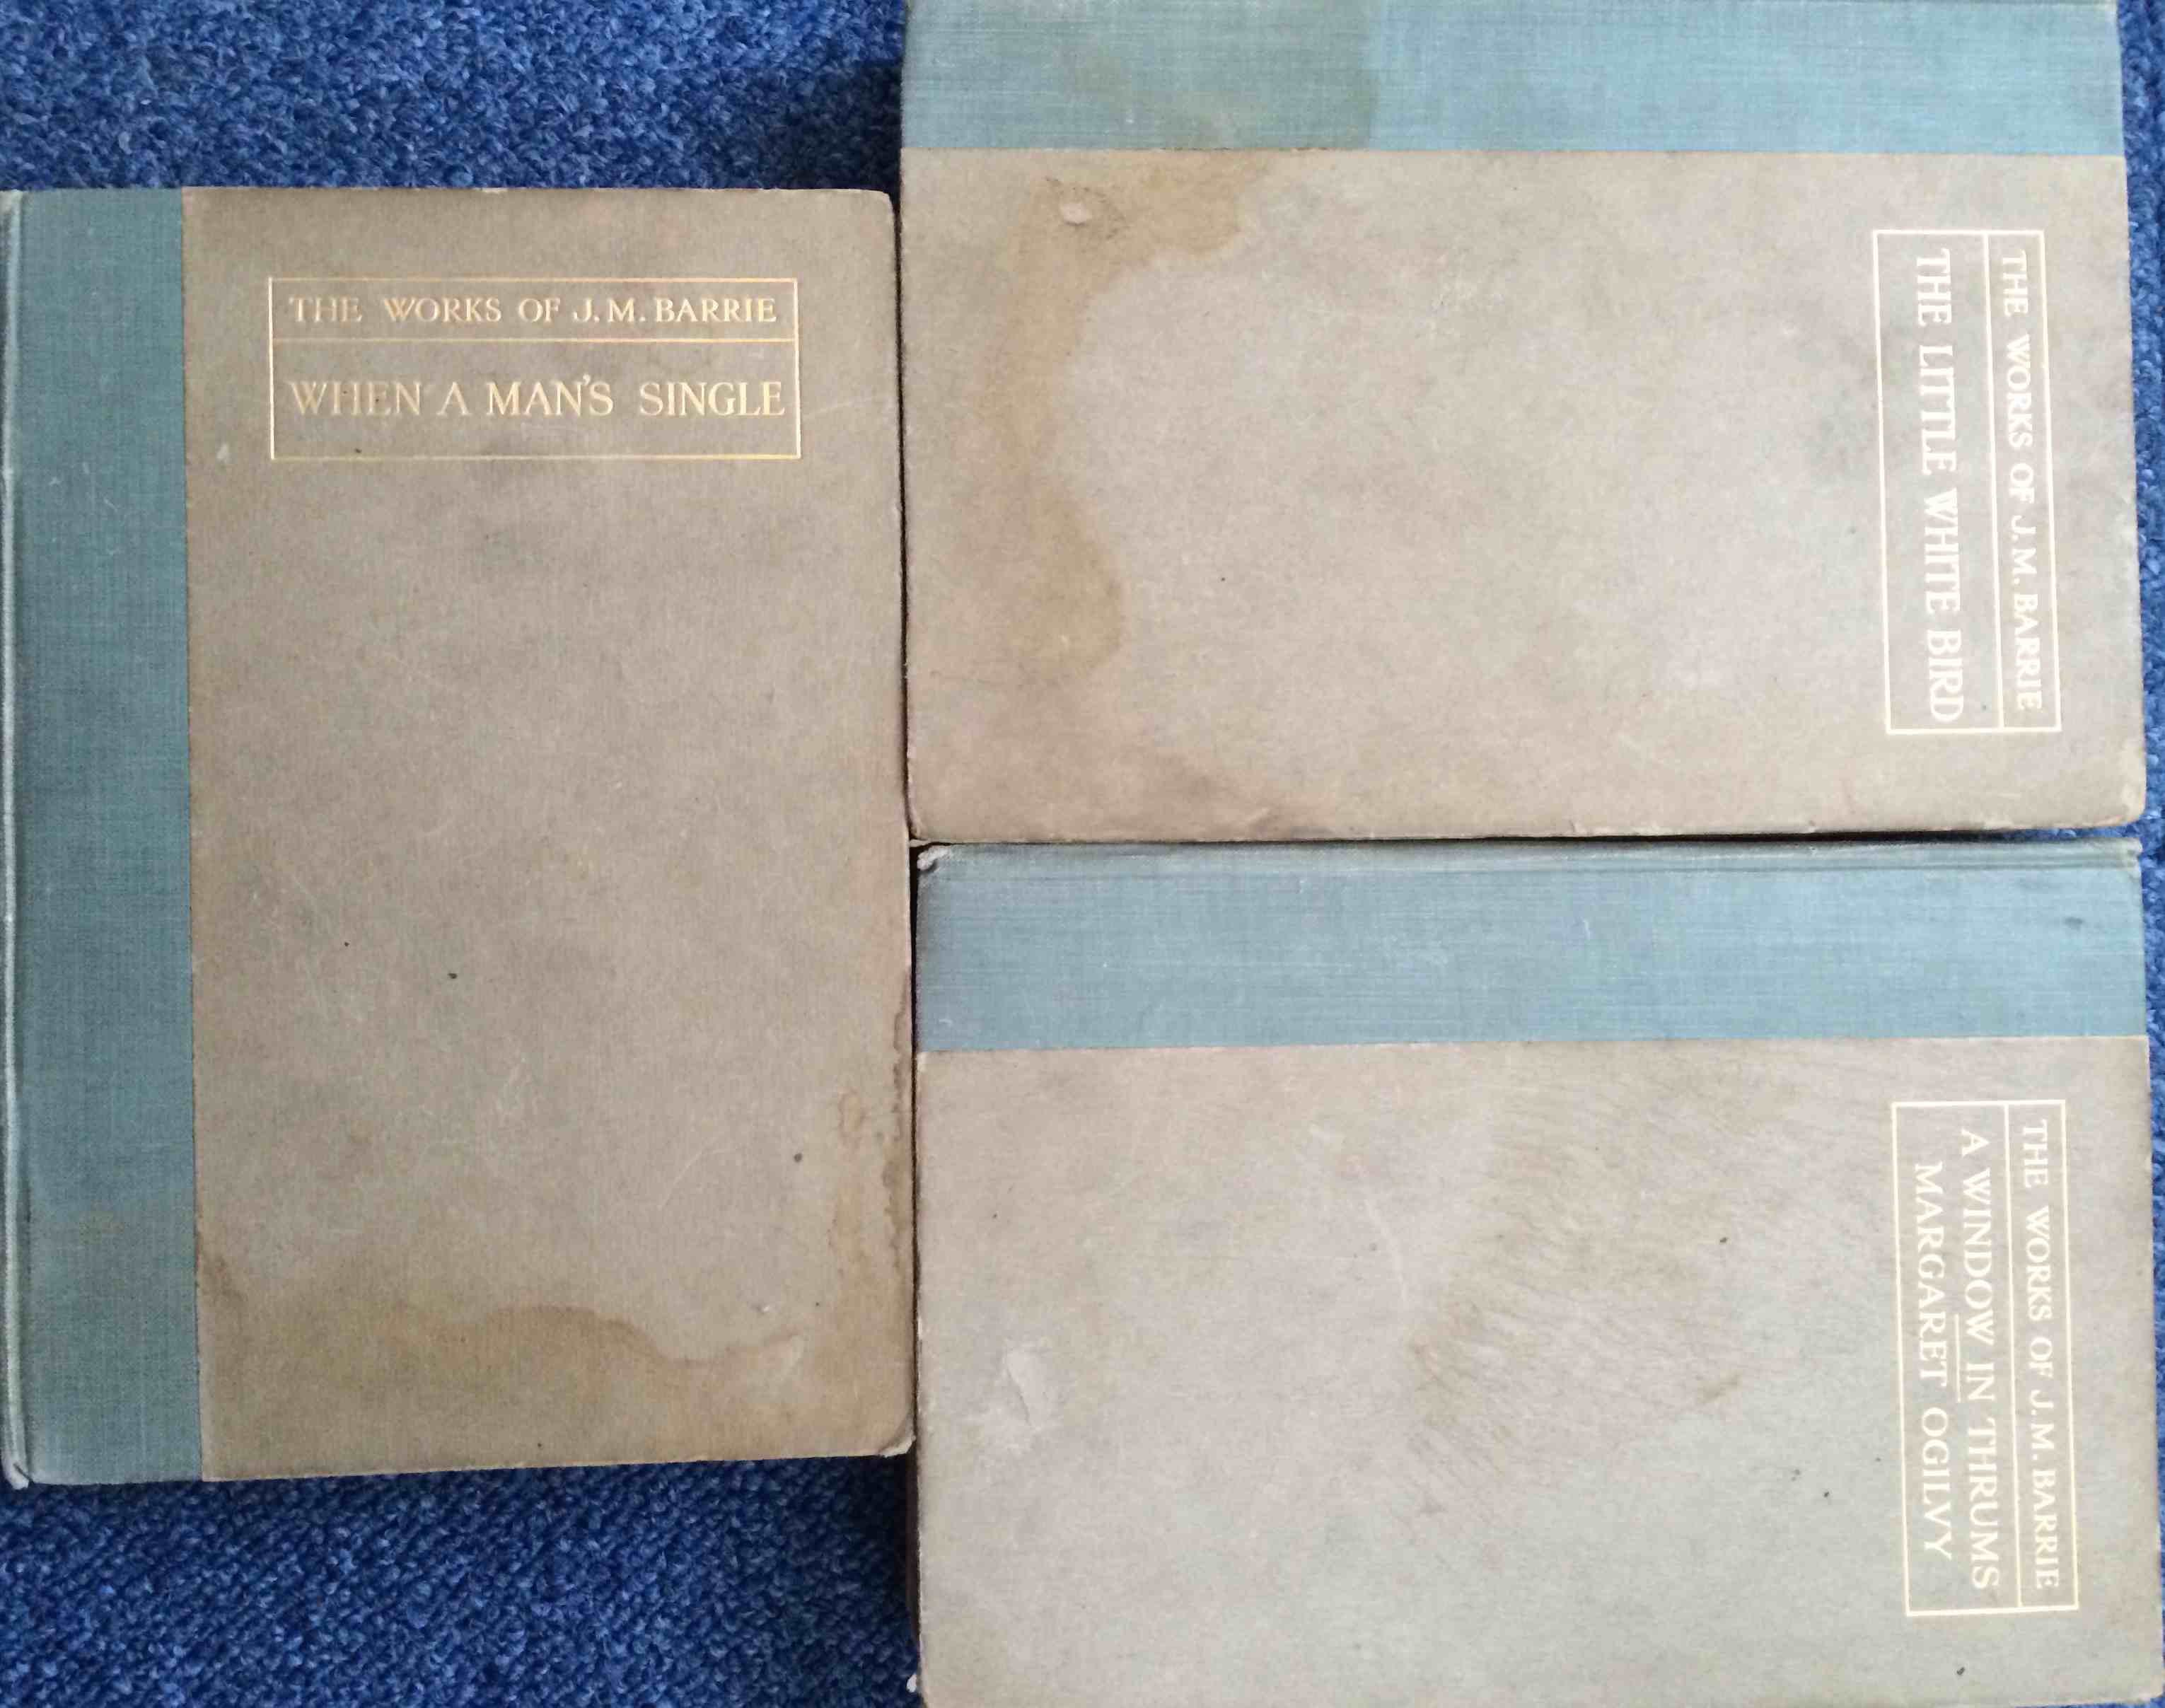 J.M Barrie 3 hardback books from the 1913 Kirriemuir collection - The Works of J M Barrie. Includes